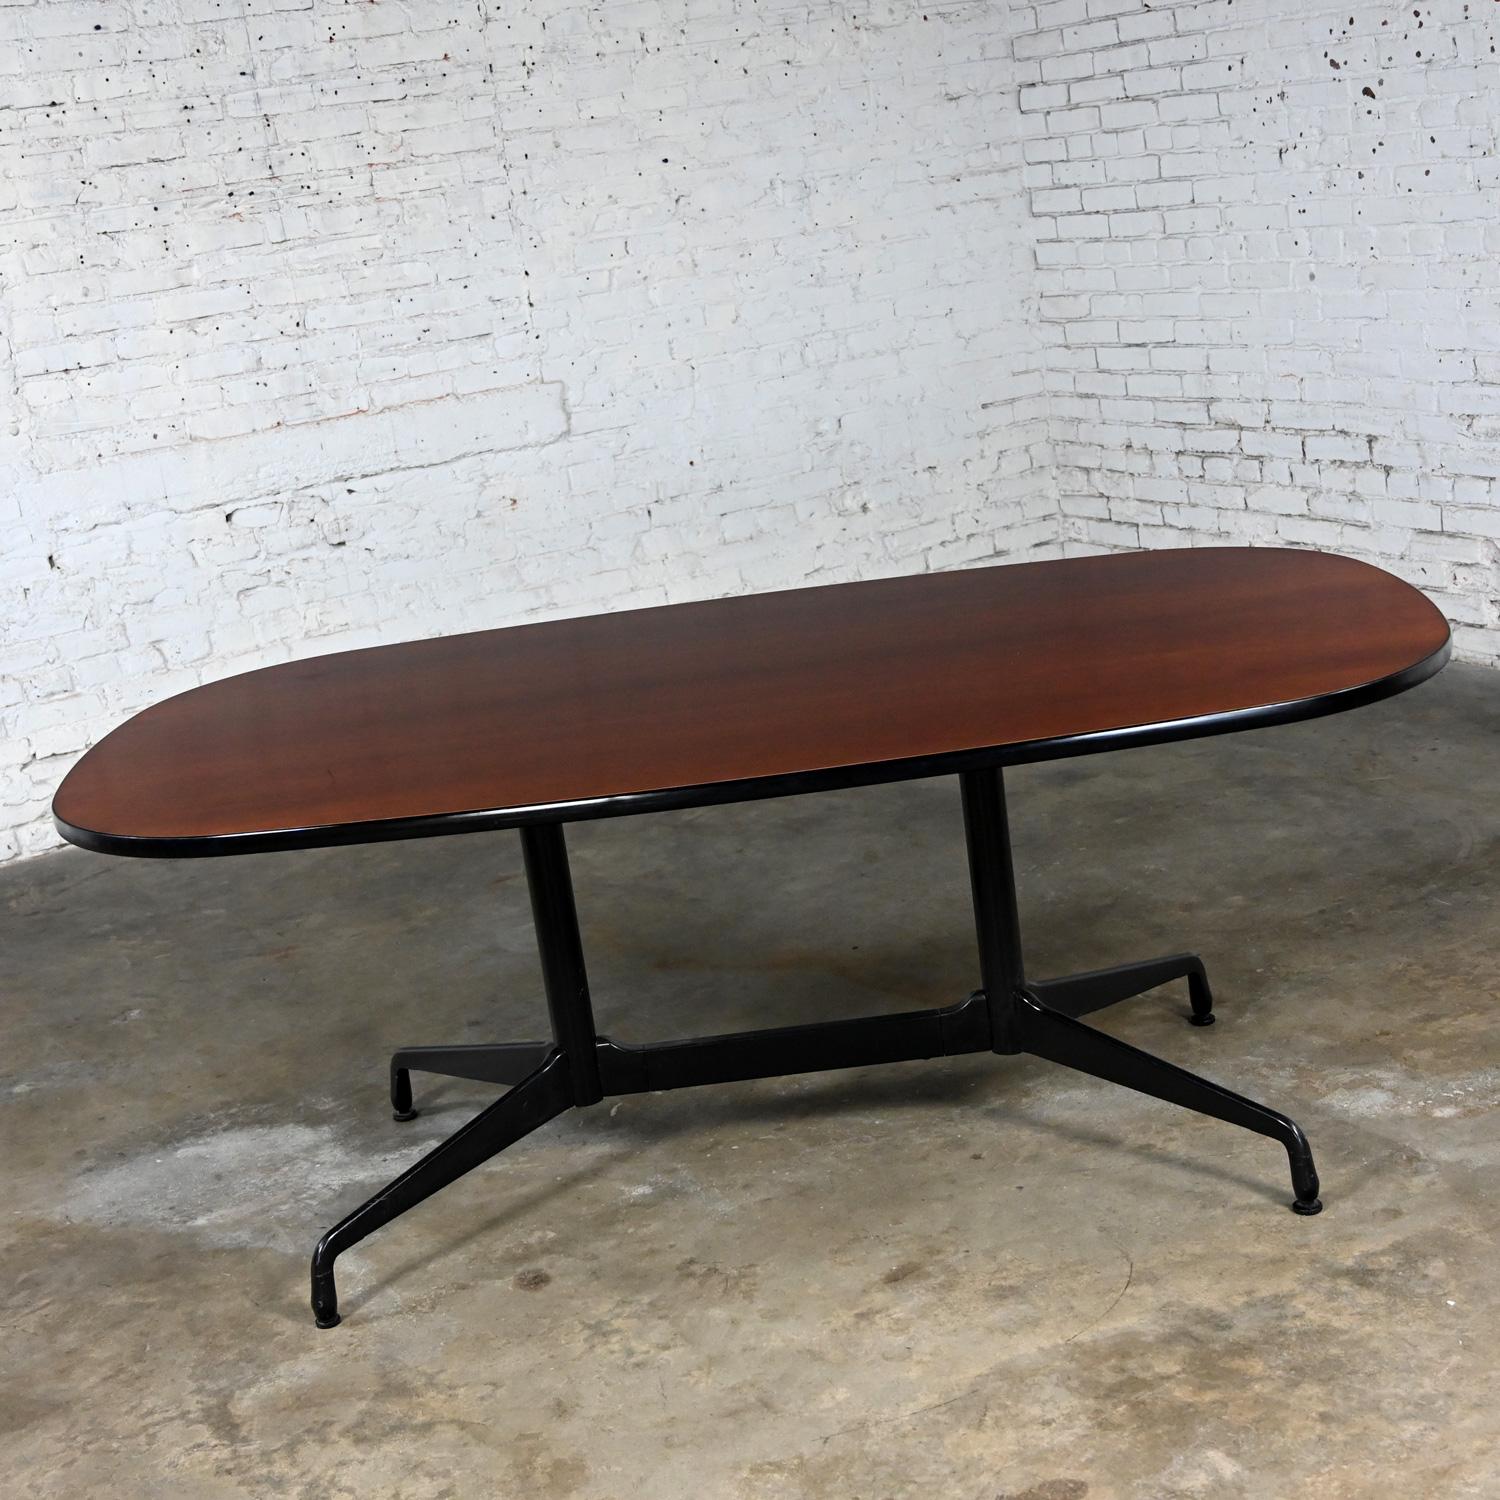 Fabulous vintage MCM (Mid-Century Modern) Eames for Herman Miller racetrack oval conference or dining table with a black universal segmented base and cherry wood veneer top with black vinyl edge banding. Beautiful condition, keeping in mind that